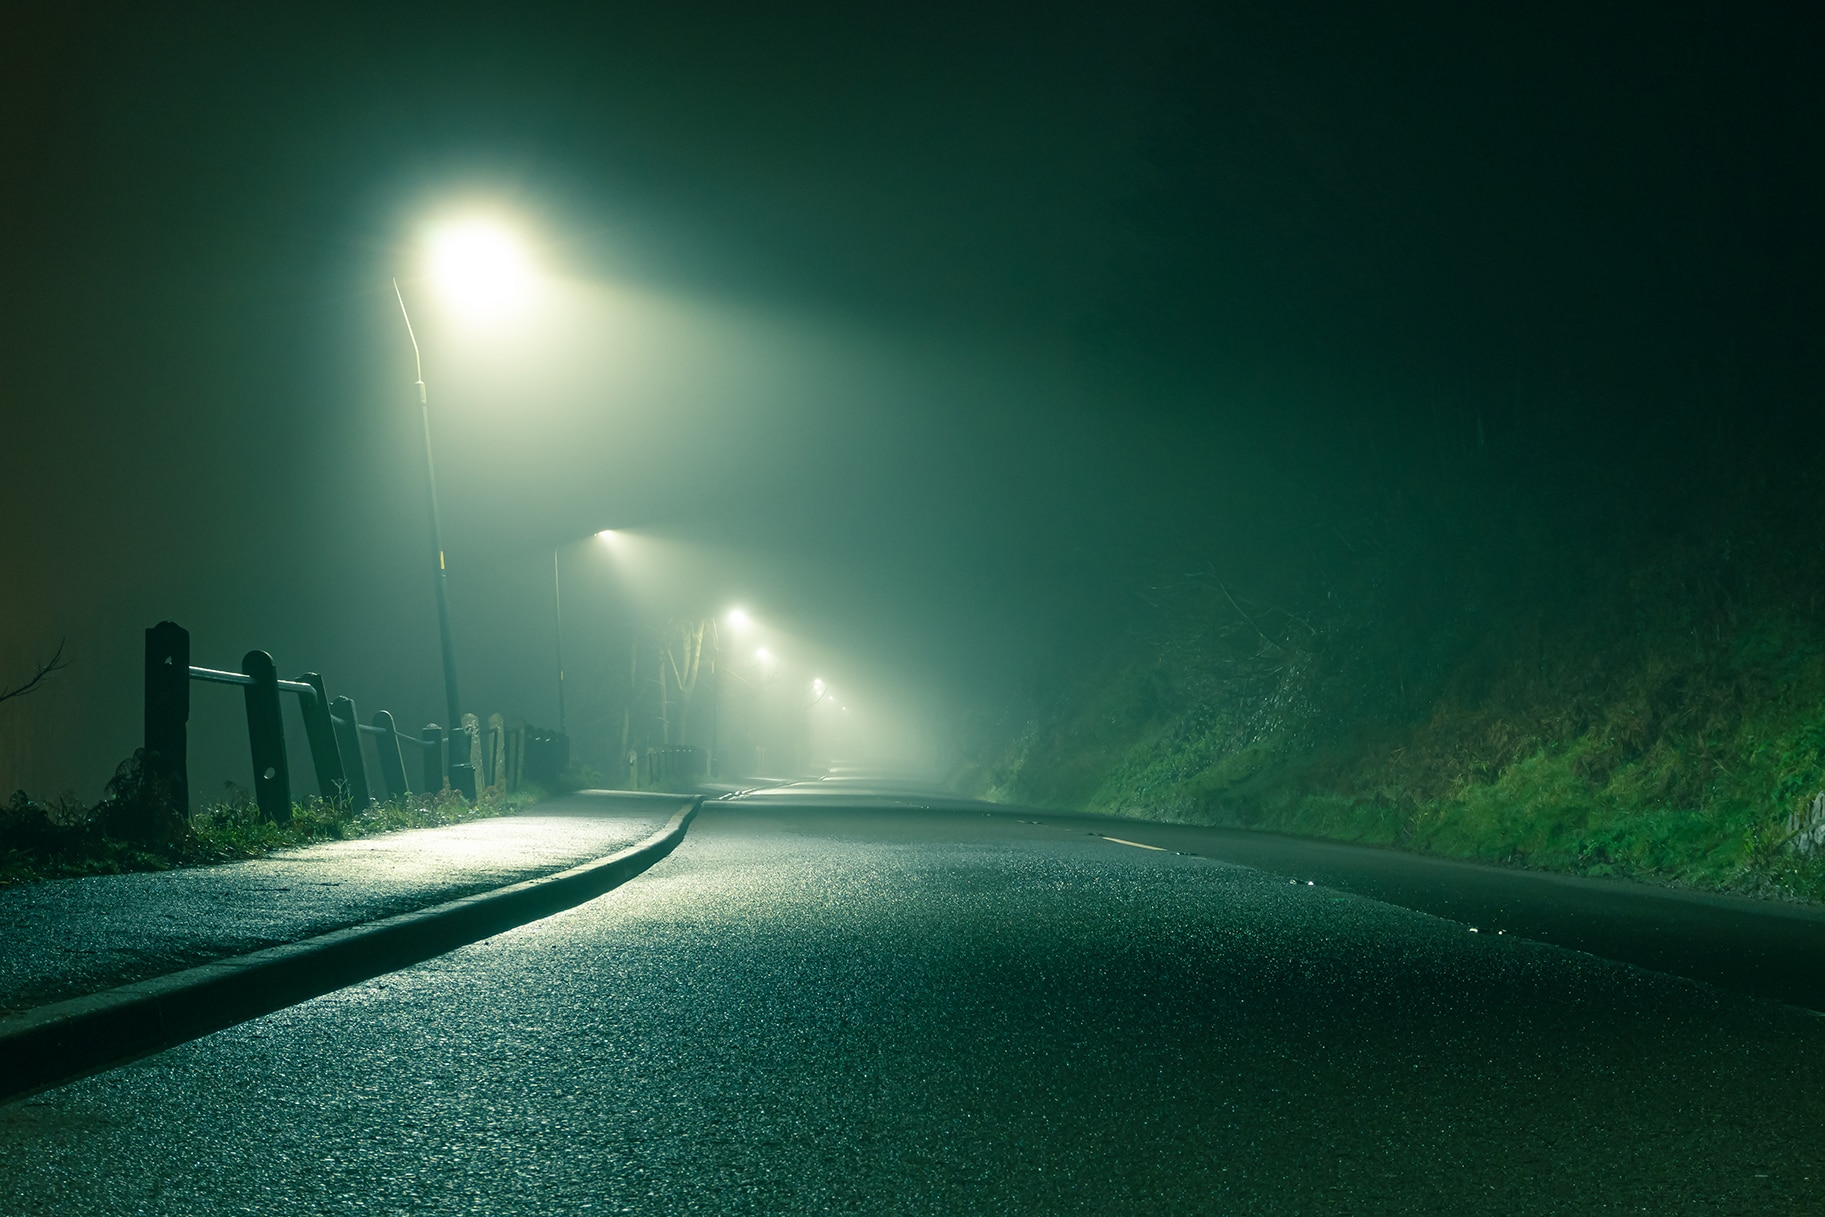 A spooky country road, going into the distance with street lights, glowing on a moody foggy night